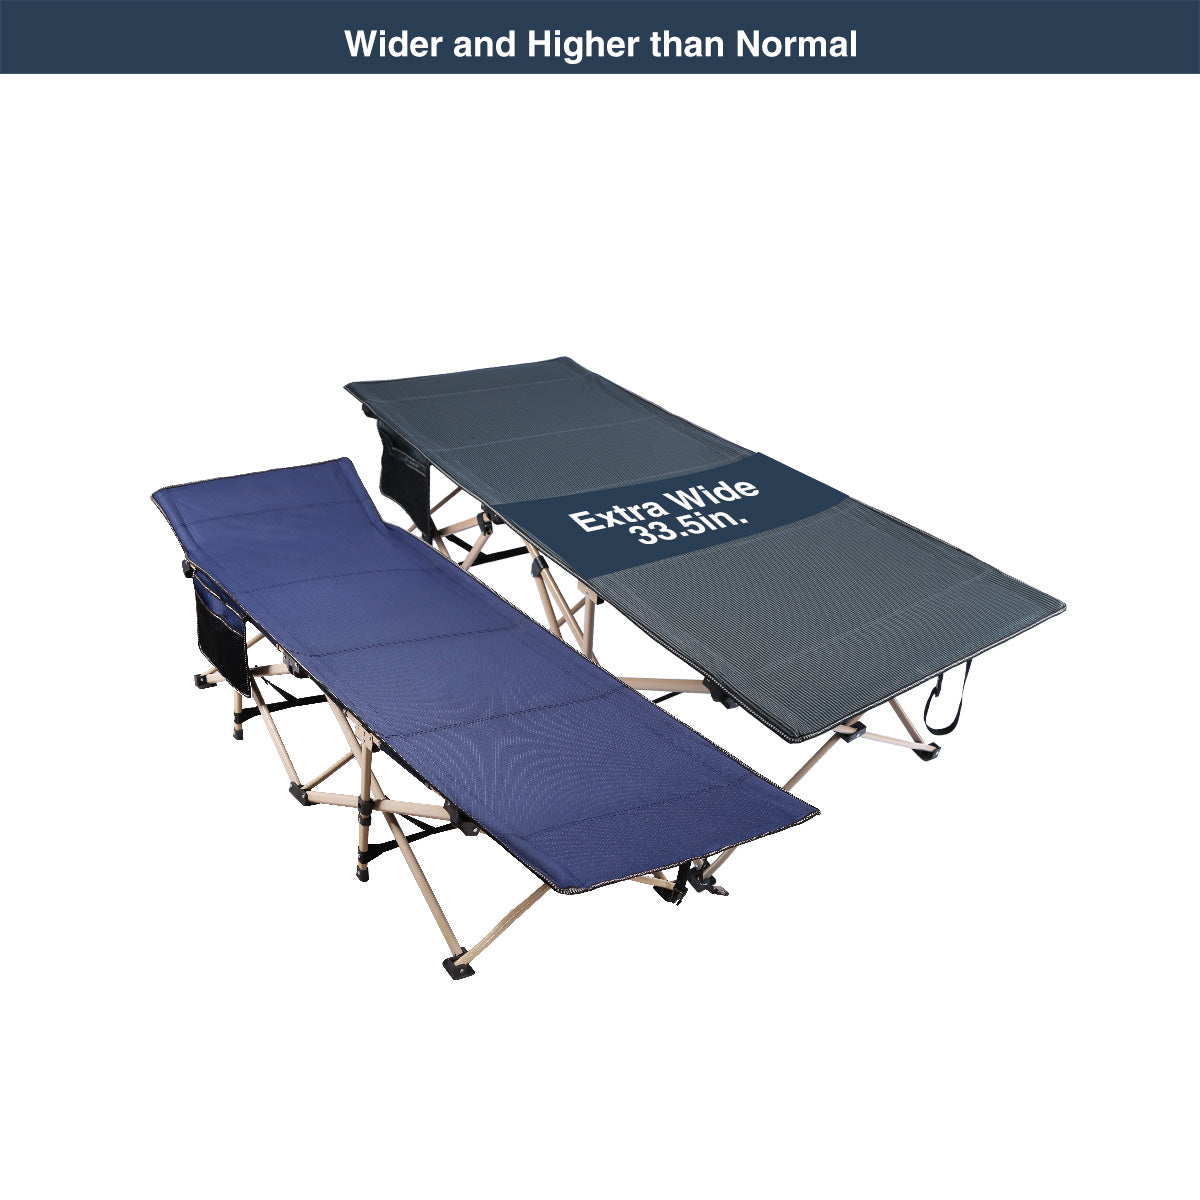 Extra Wide Folding Camping Cot for Adults, Grey Blue Green